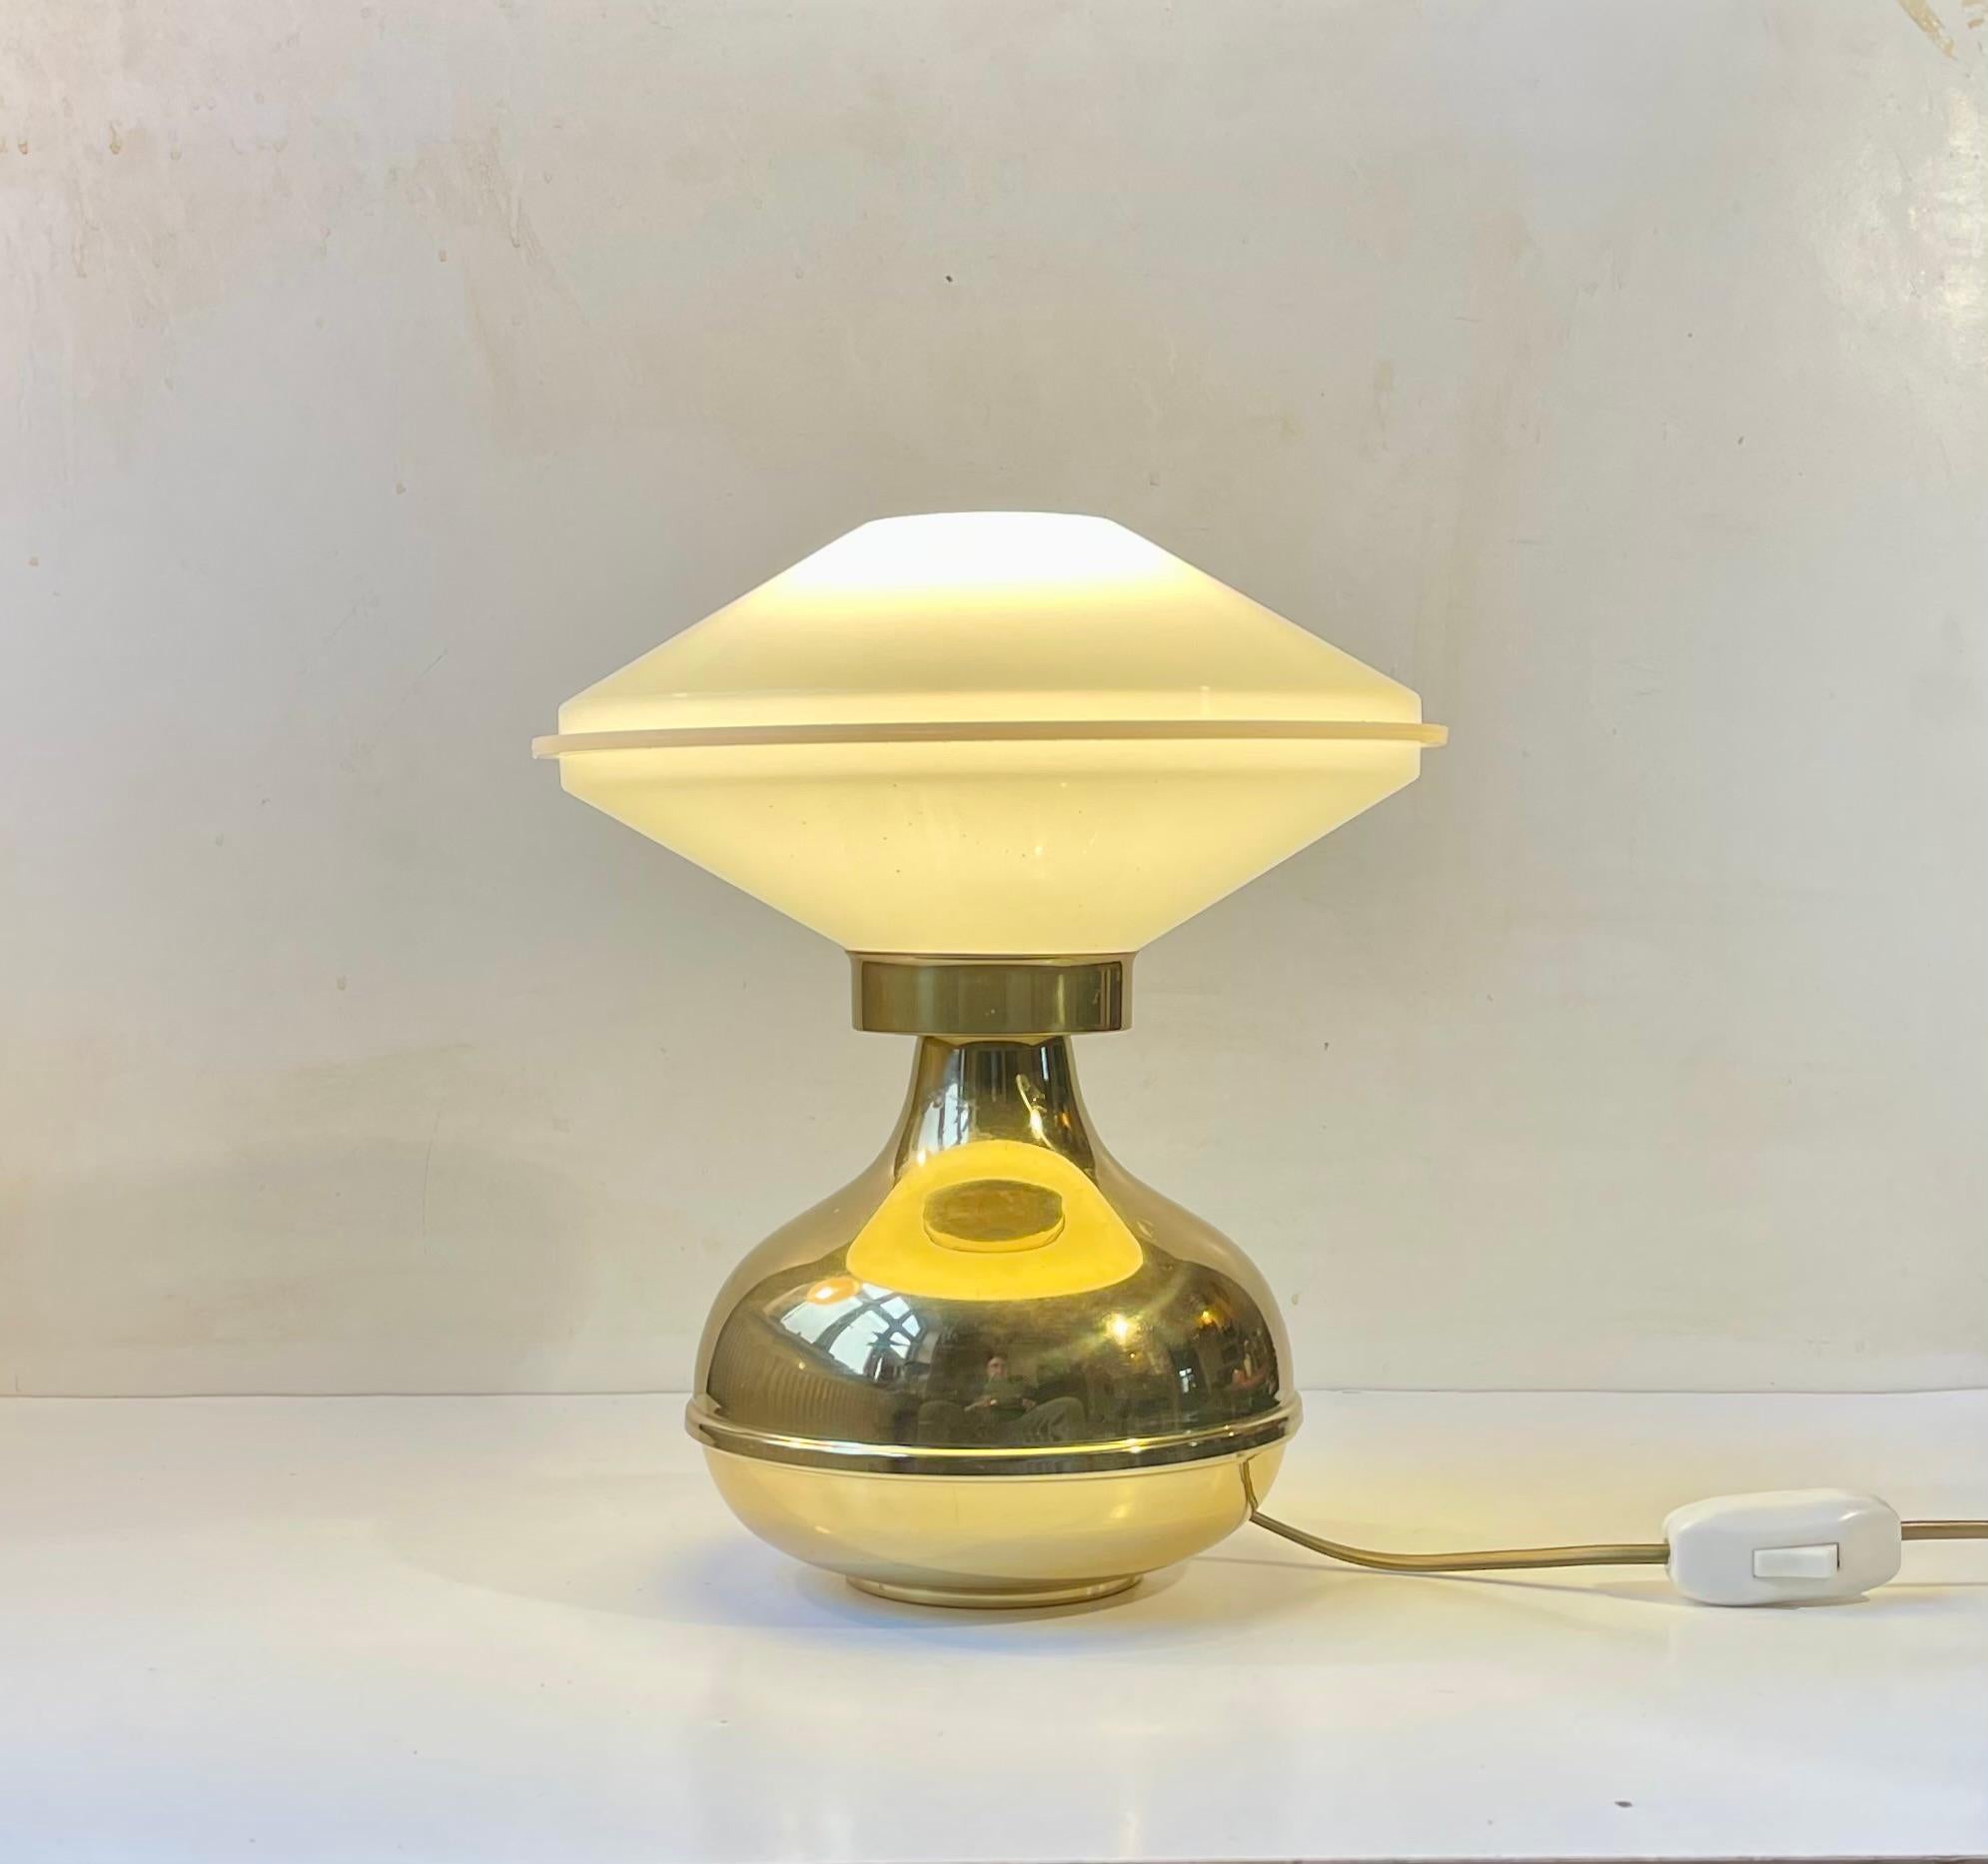 Small simplistically composed Table Lamp from danish ABO - Metal Art Studio. Manufactured and designed in the late 1970s. It features an UFO shaped acrylic shade and on/of switch to its cord. It resembles designs by Hans Agne Jakobsson and Henning